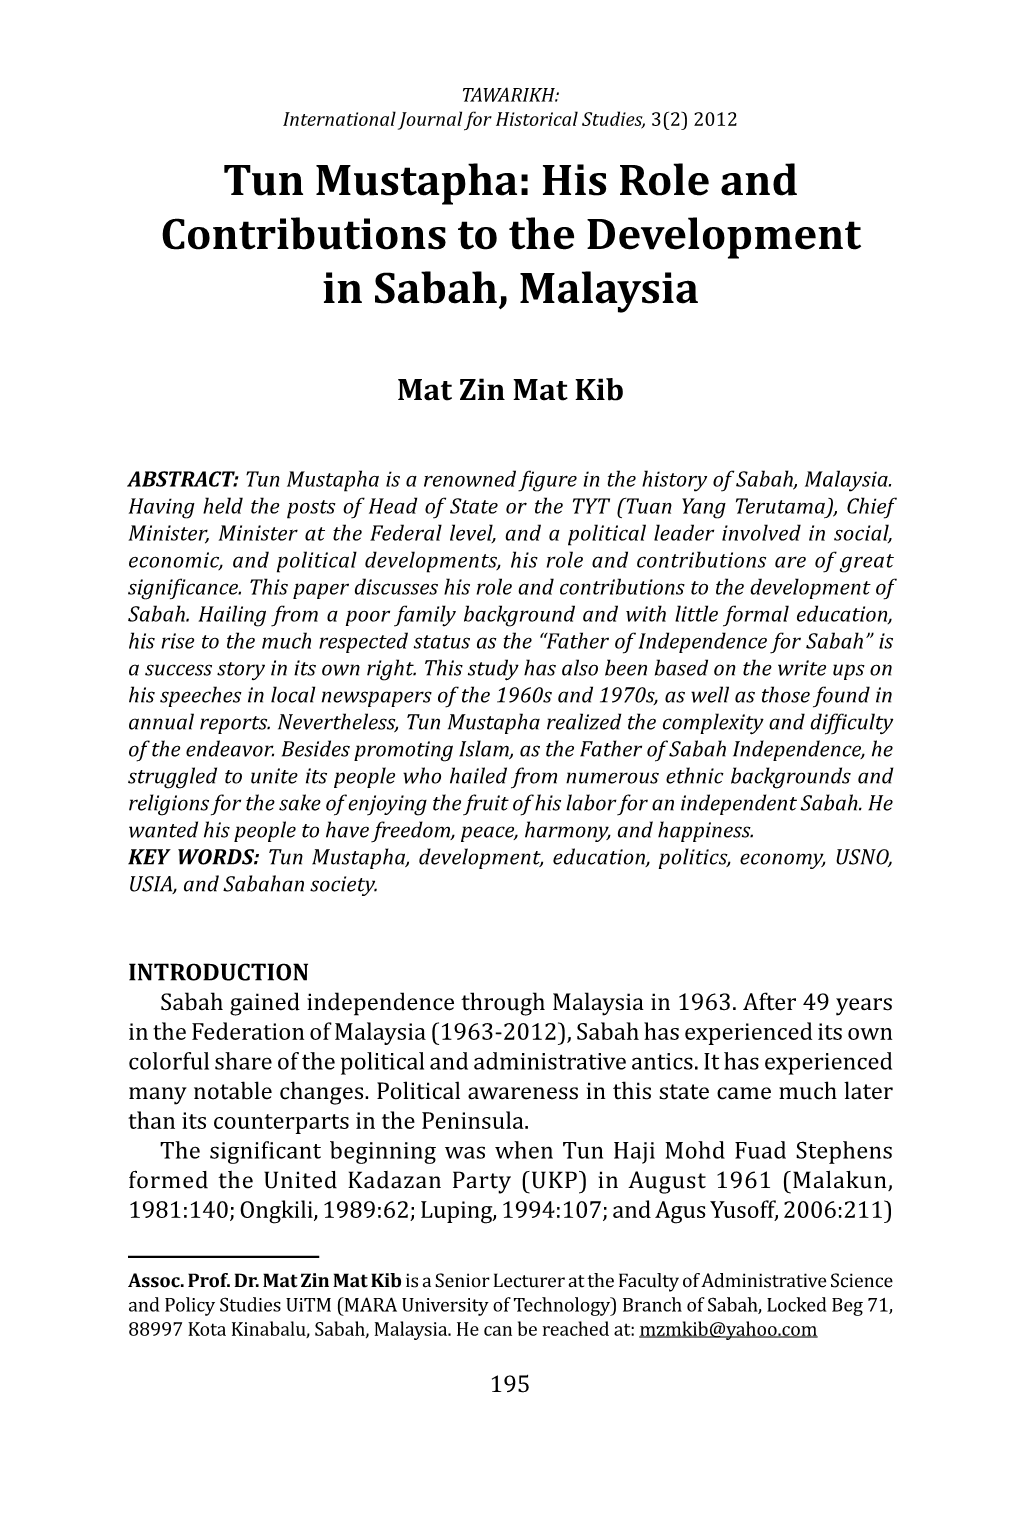 Tun Mustapha: His Role and Contributions to the Development in Sabah, Malaysia